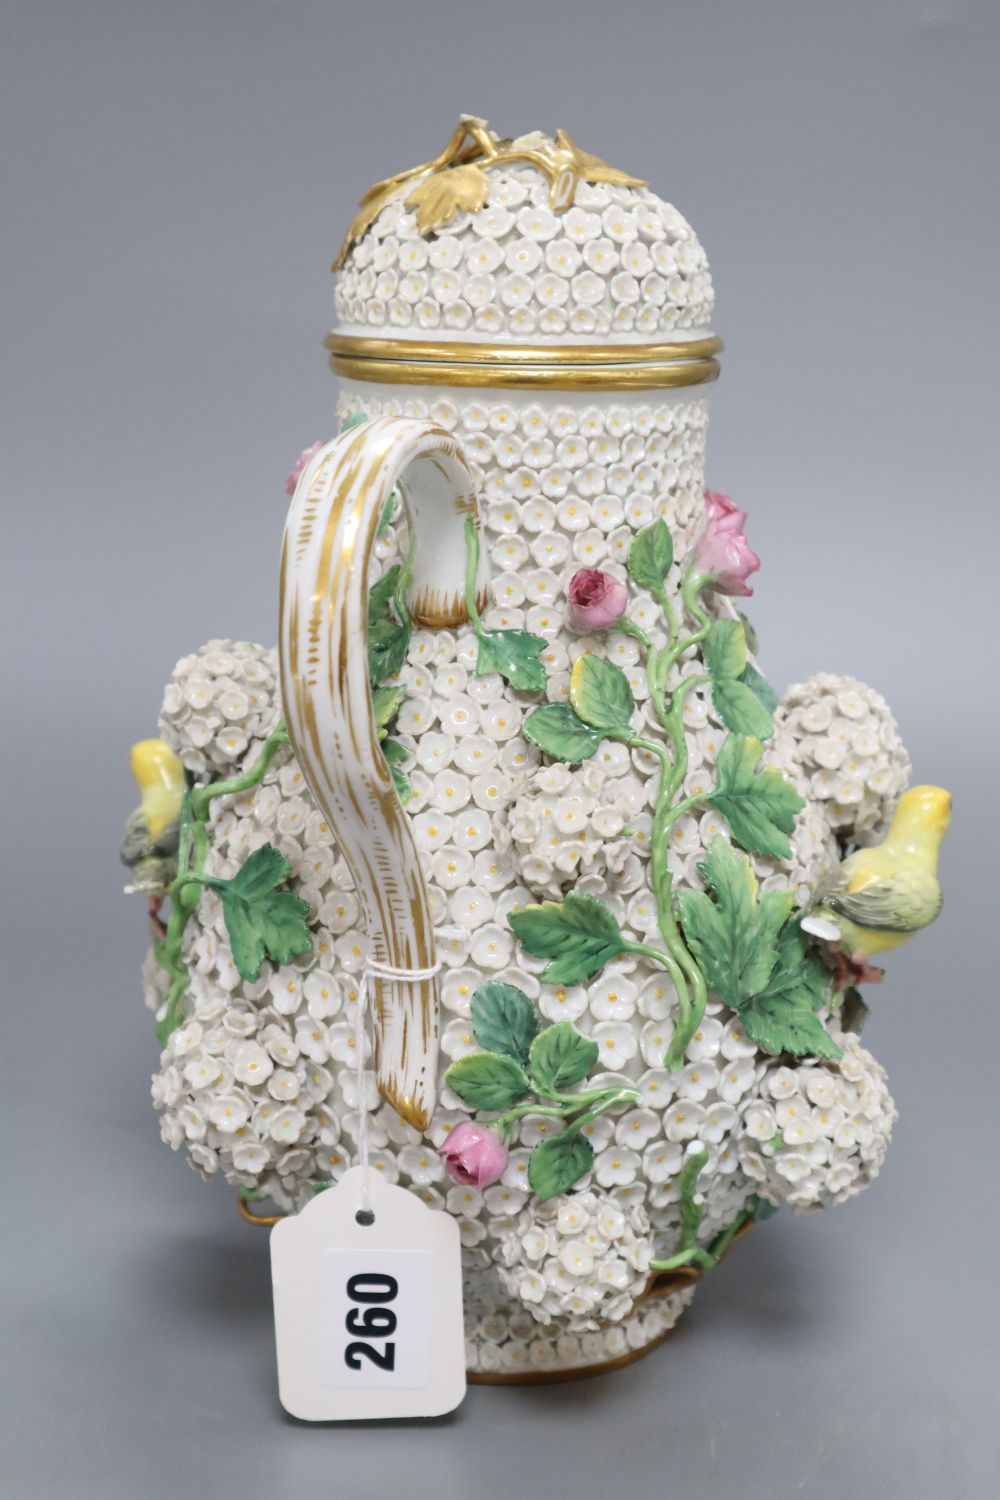 A Meissen floral encrusted hot water jug and cover, height 26cm